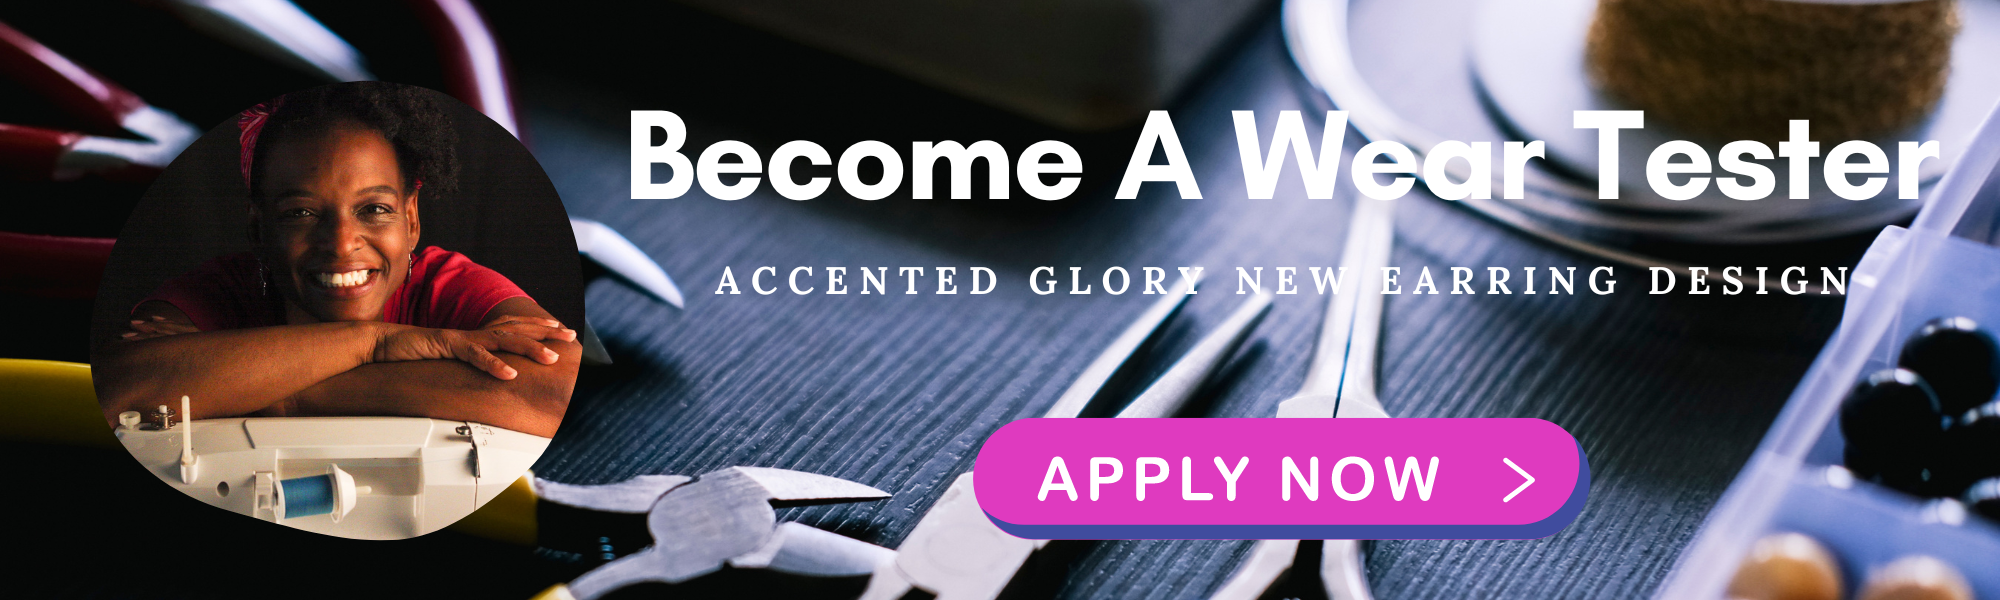 Become A Wear Tester for Accented Glory